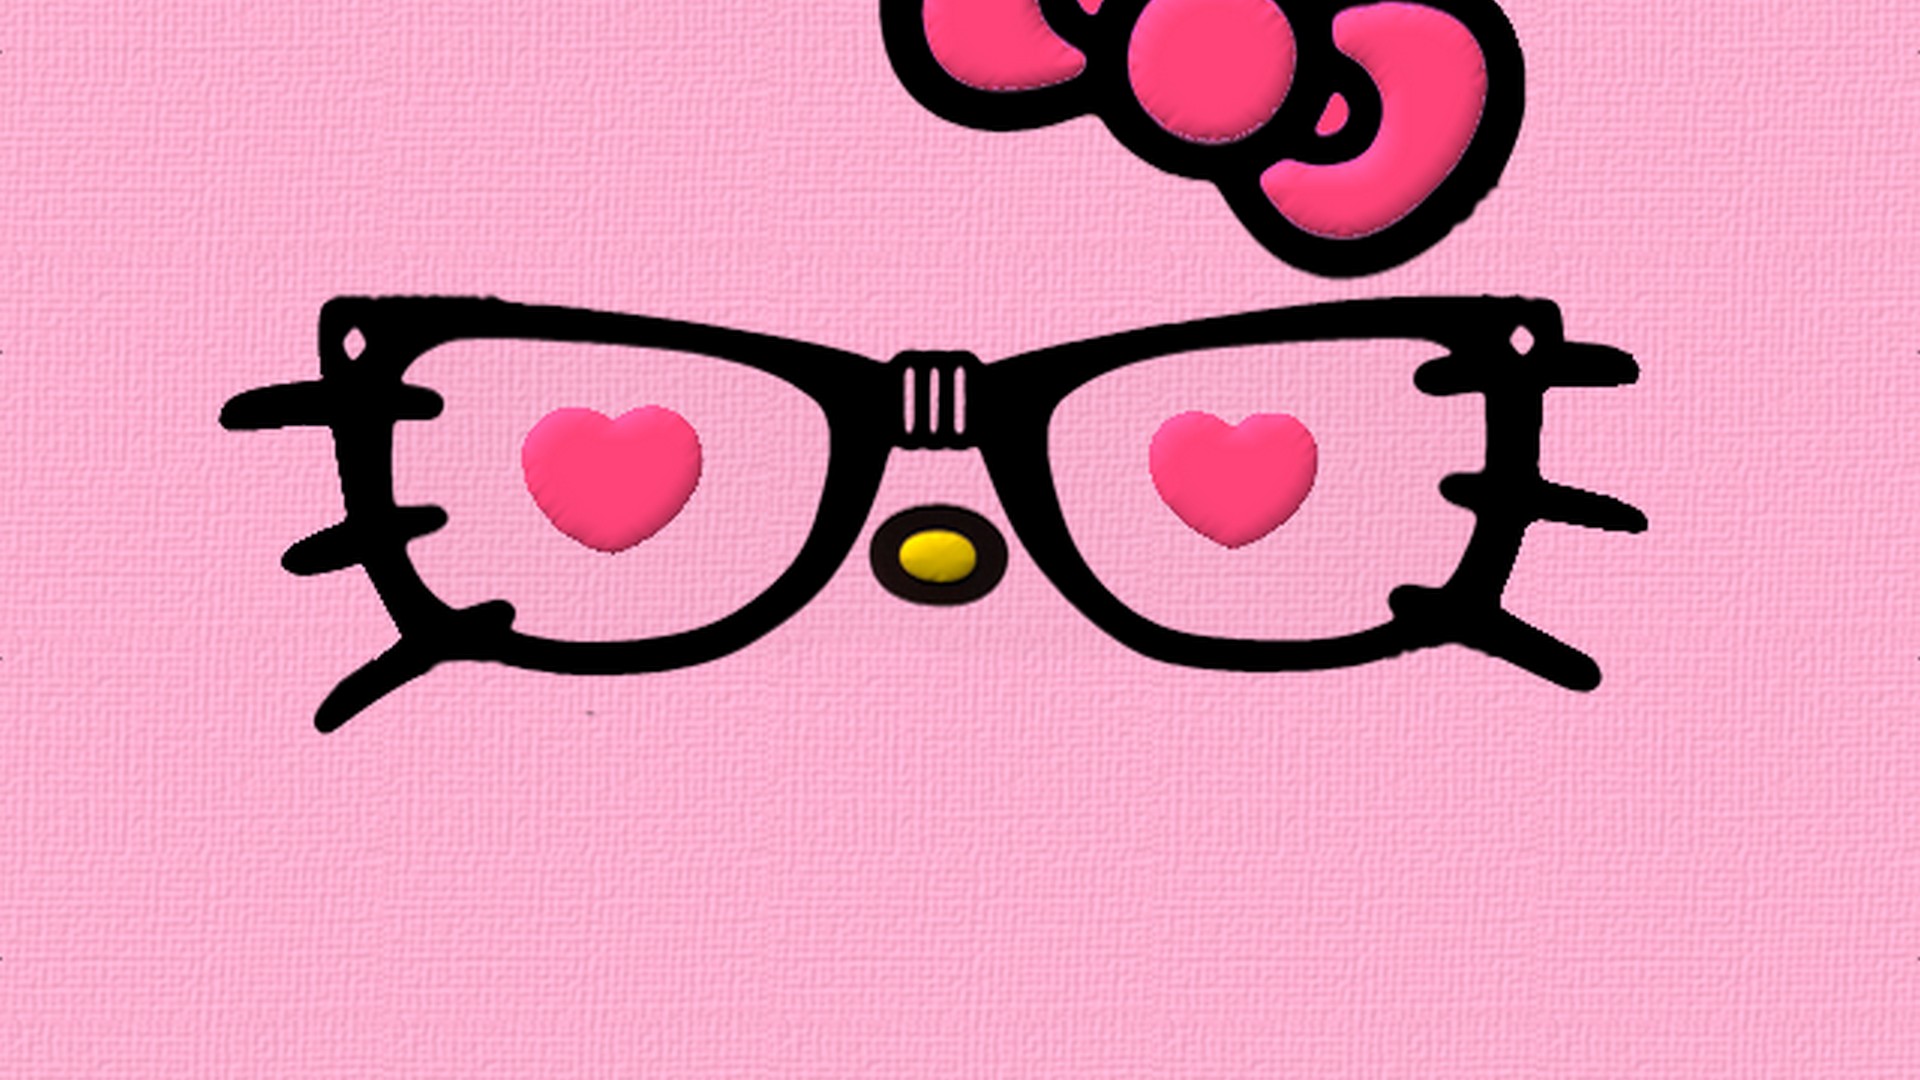 Sanrio Hello Kitty Wallpaper For Desktop with image resolution 1920x1080 pixel. You can use this wallpaper as background for your desktop Computer Screensavers, Android or iPhone smartphones